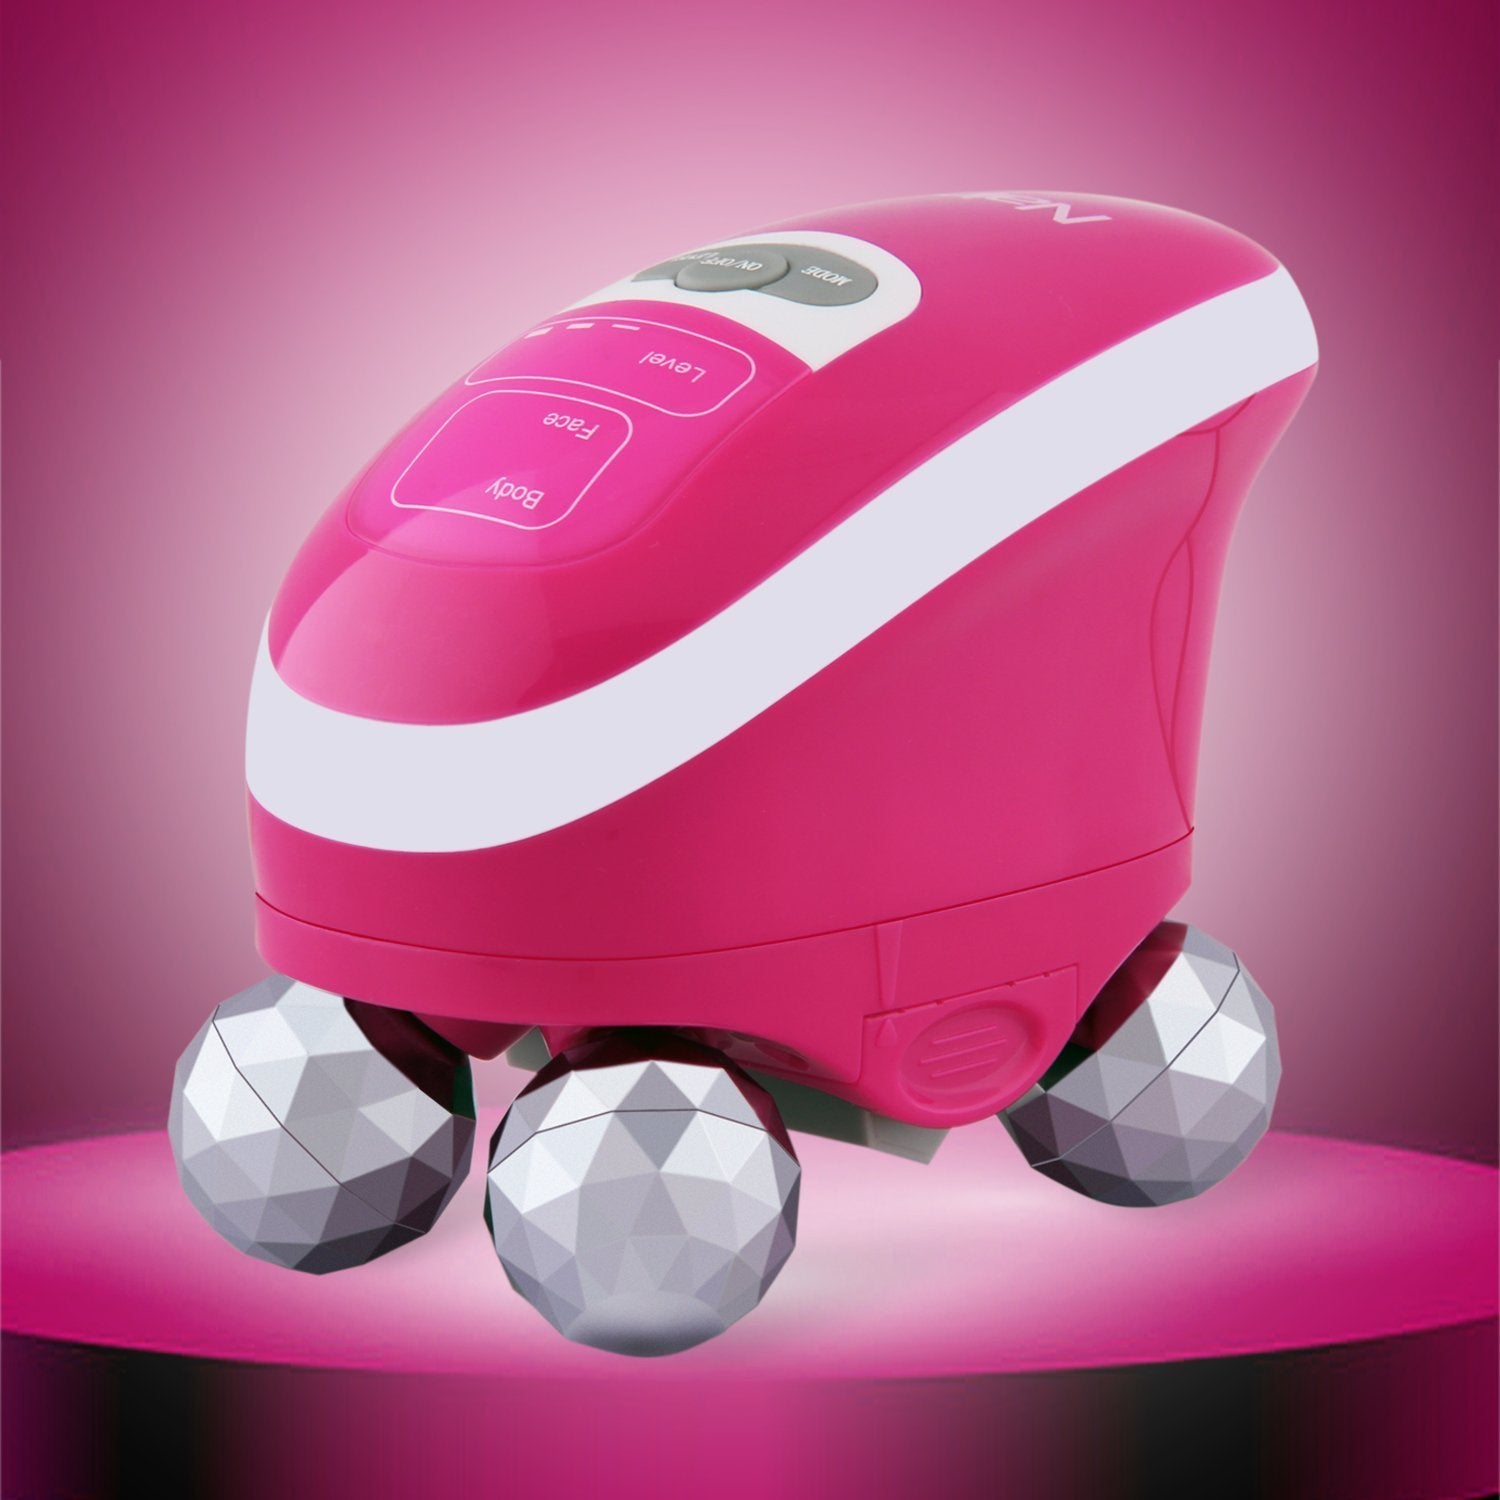 Load image into Gallery viewer, Naipo Handheld Face Massager Electric Roller - NAIPO
